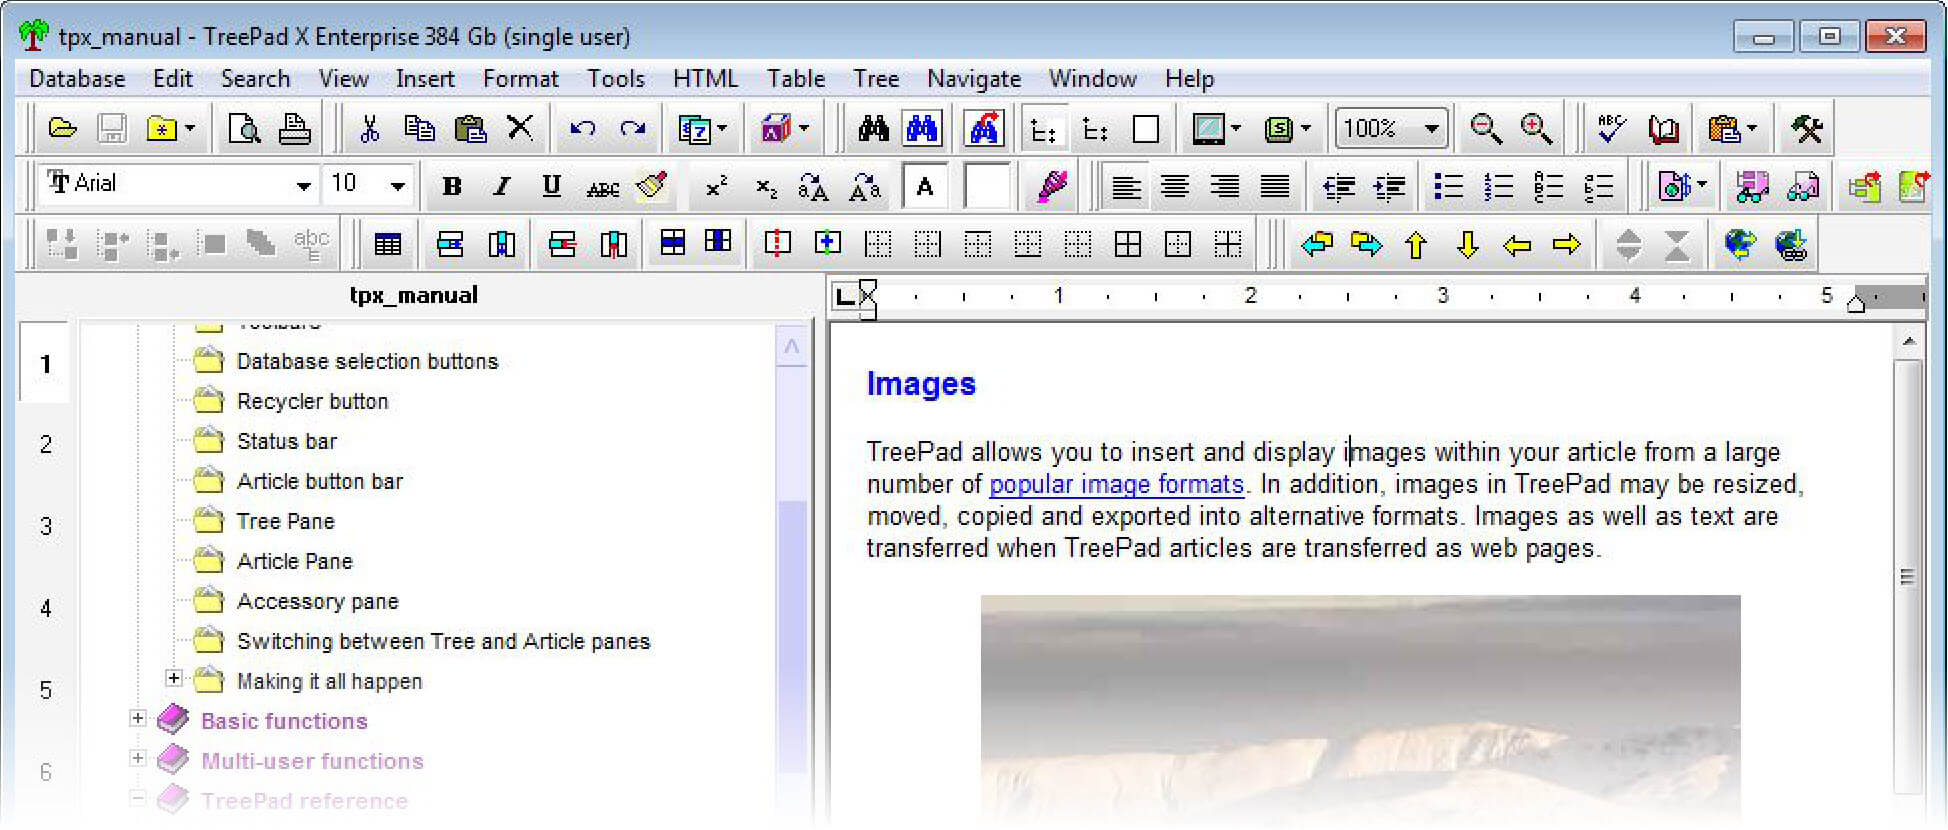 Screenshot of the now defunct TreePad personal information manager